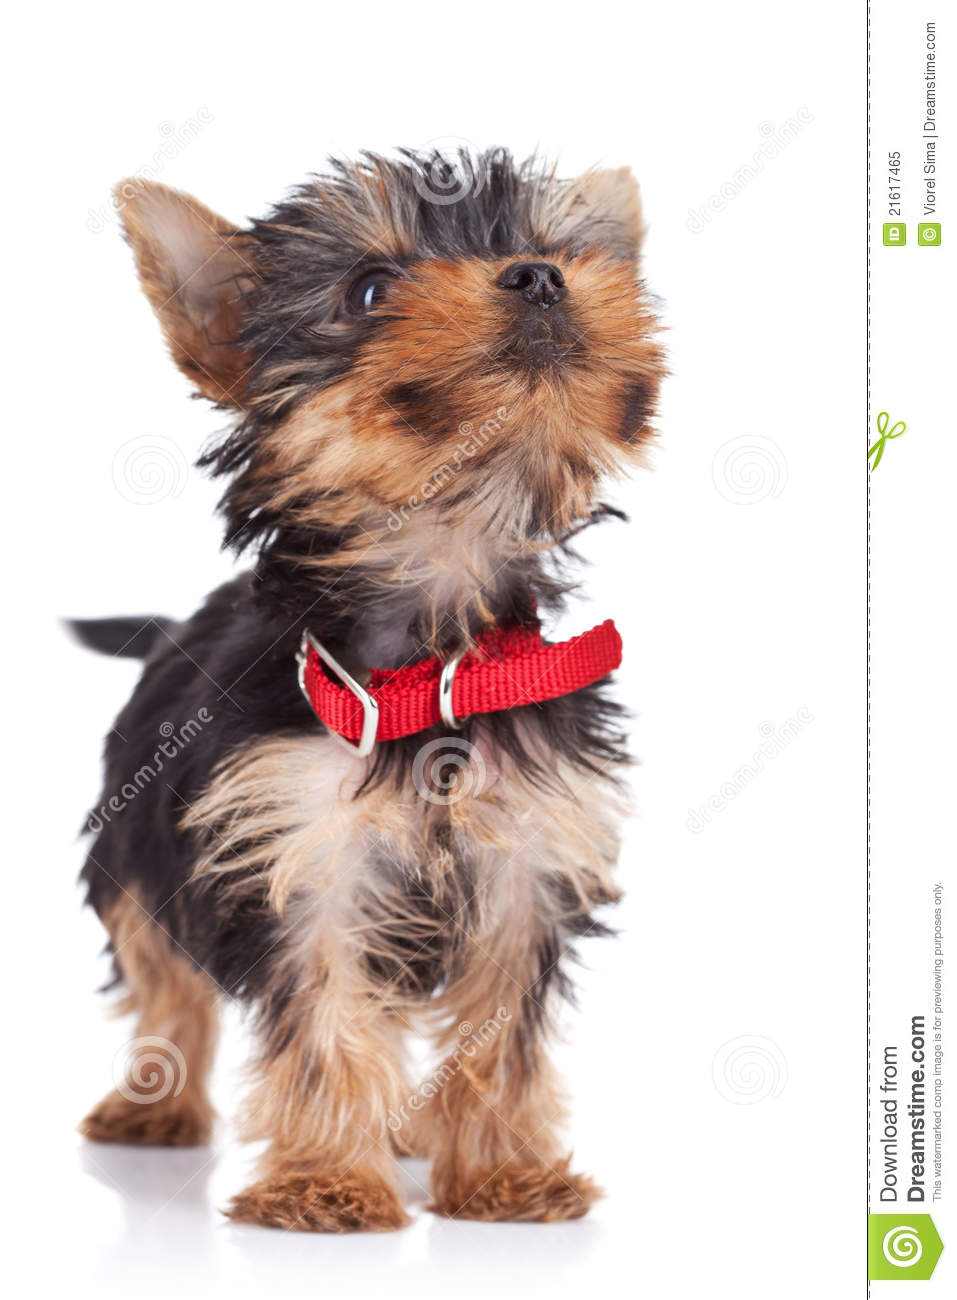 Cute Yorkie Toy Standing Royalty Free Stock Photo   Image  21617465